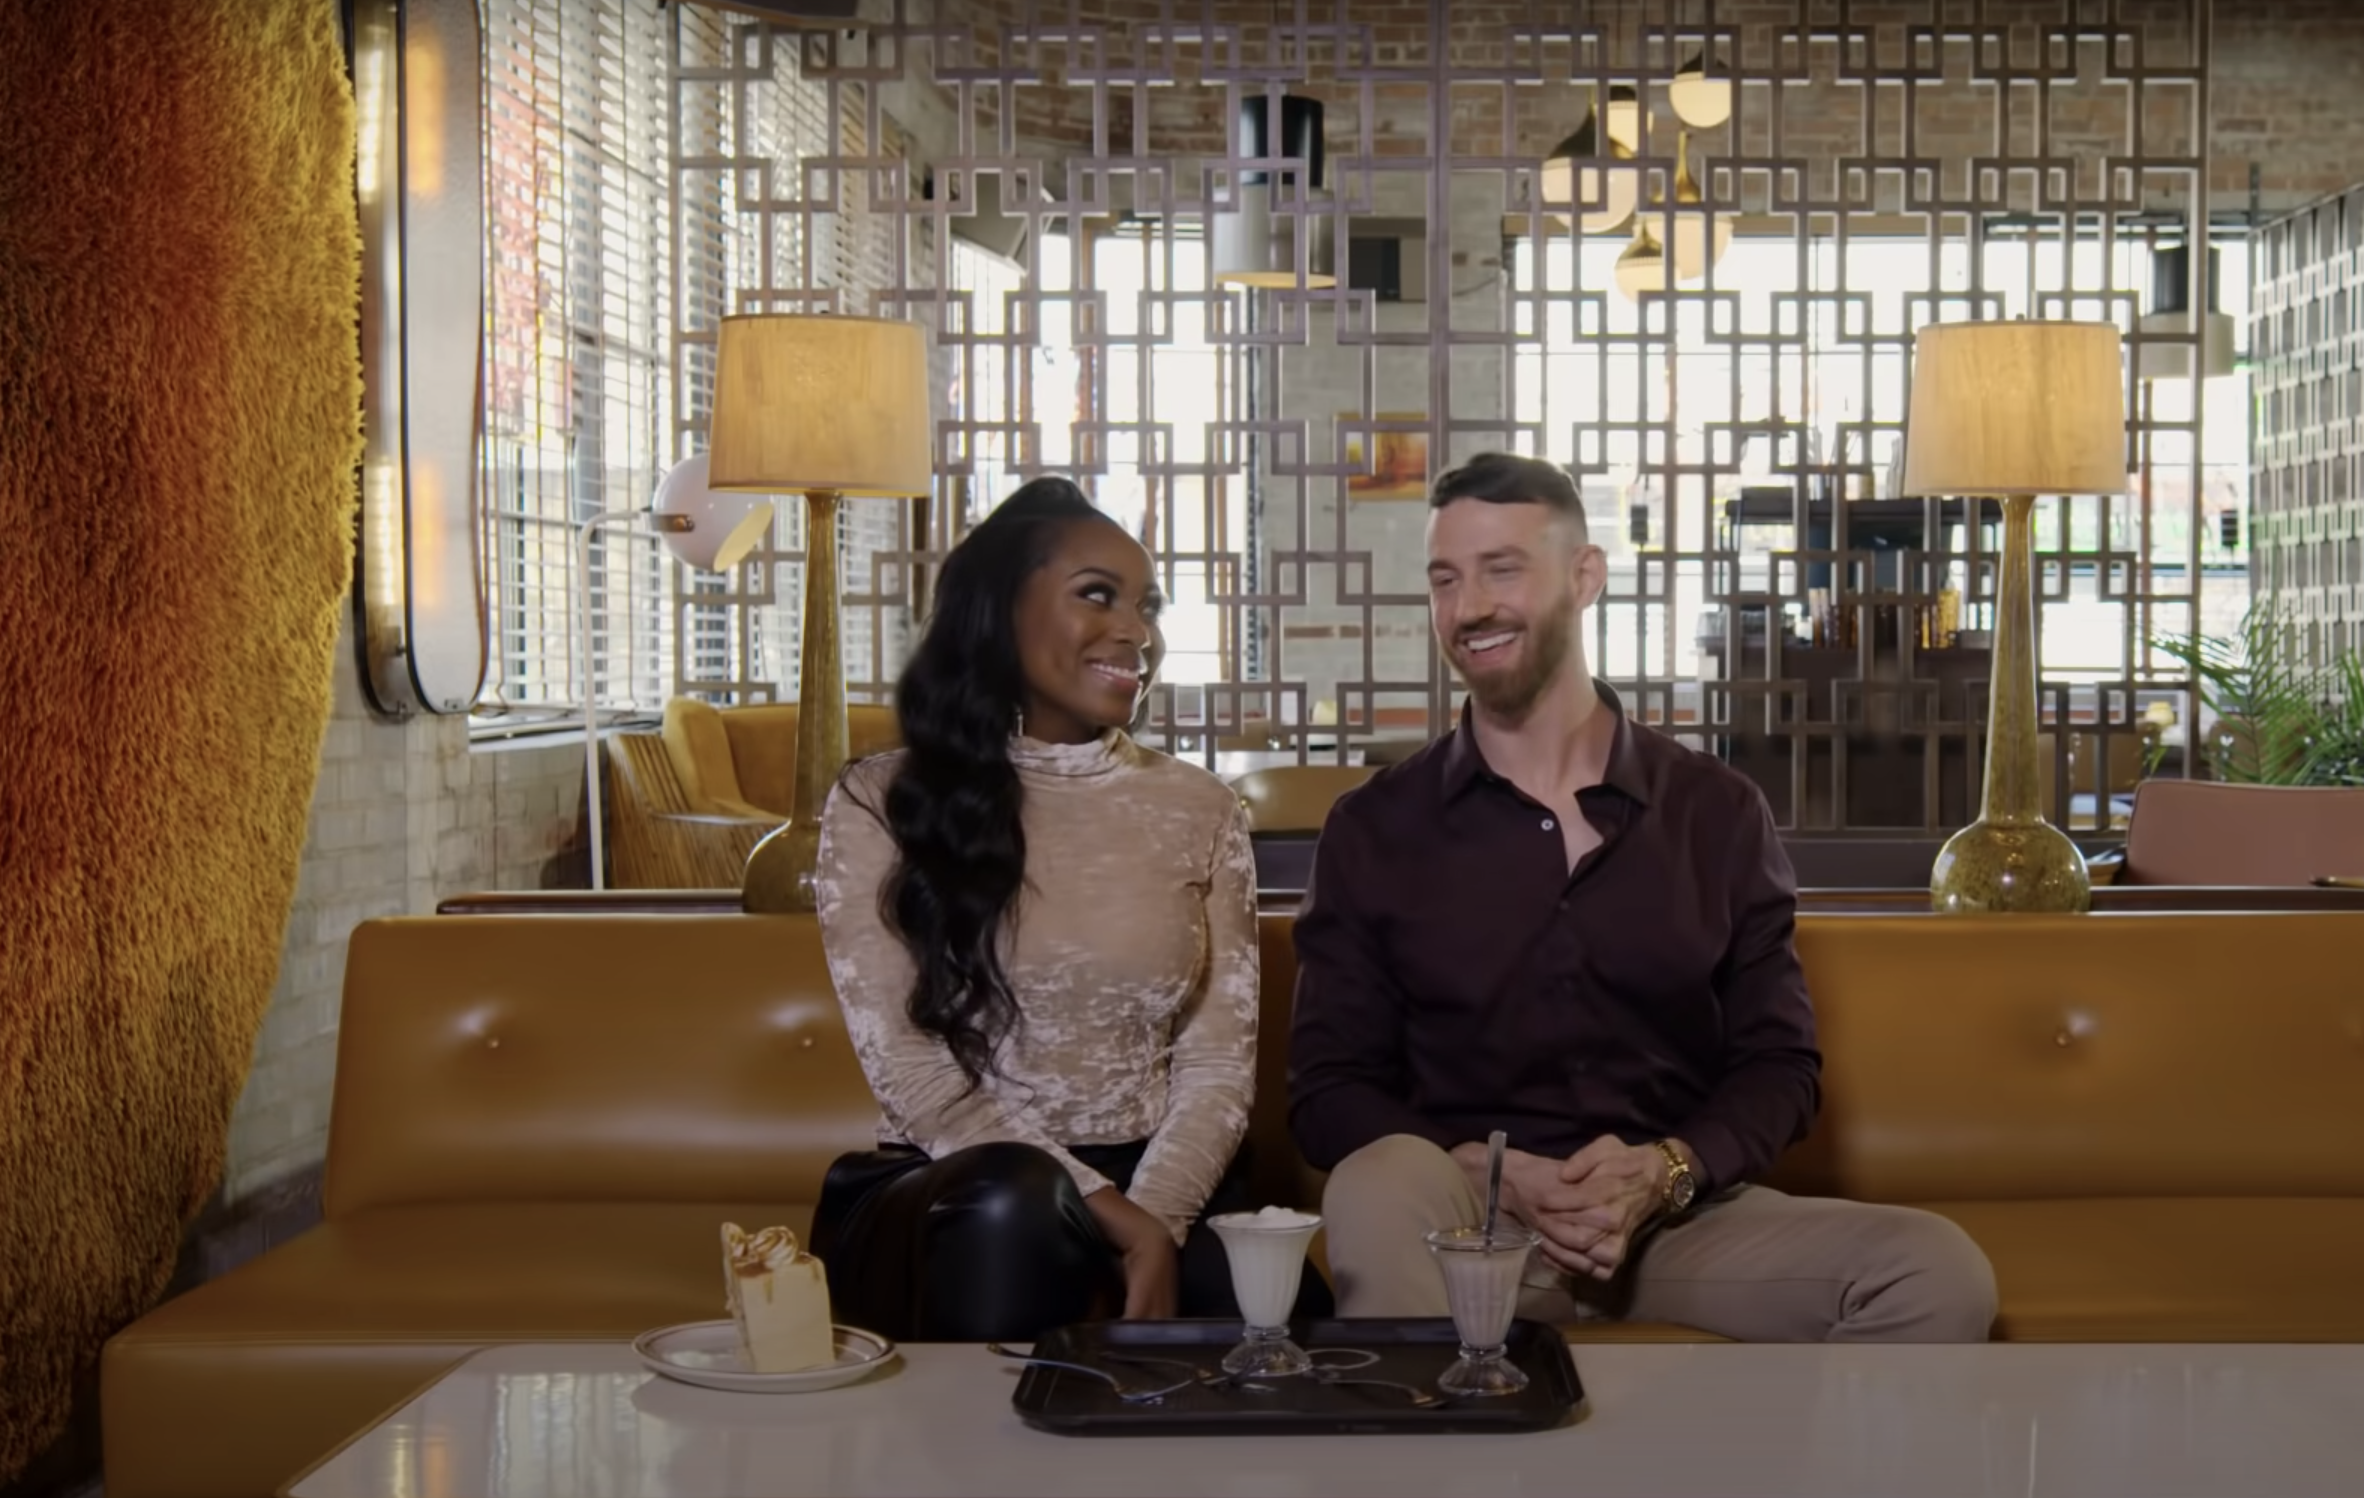 Netflix dating show 'Love is Blind' is looking for Detroit contestants, Detroit